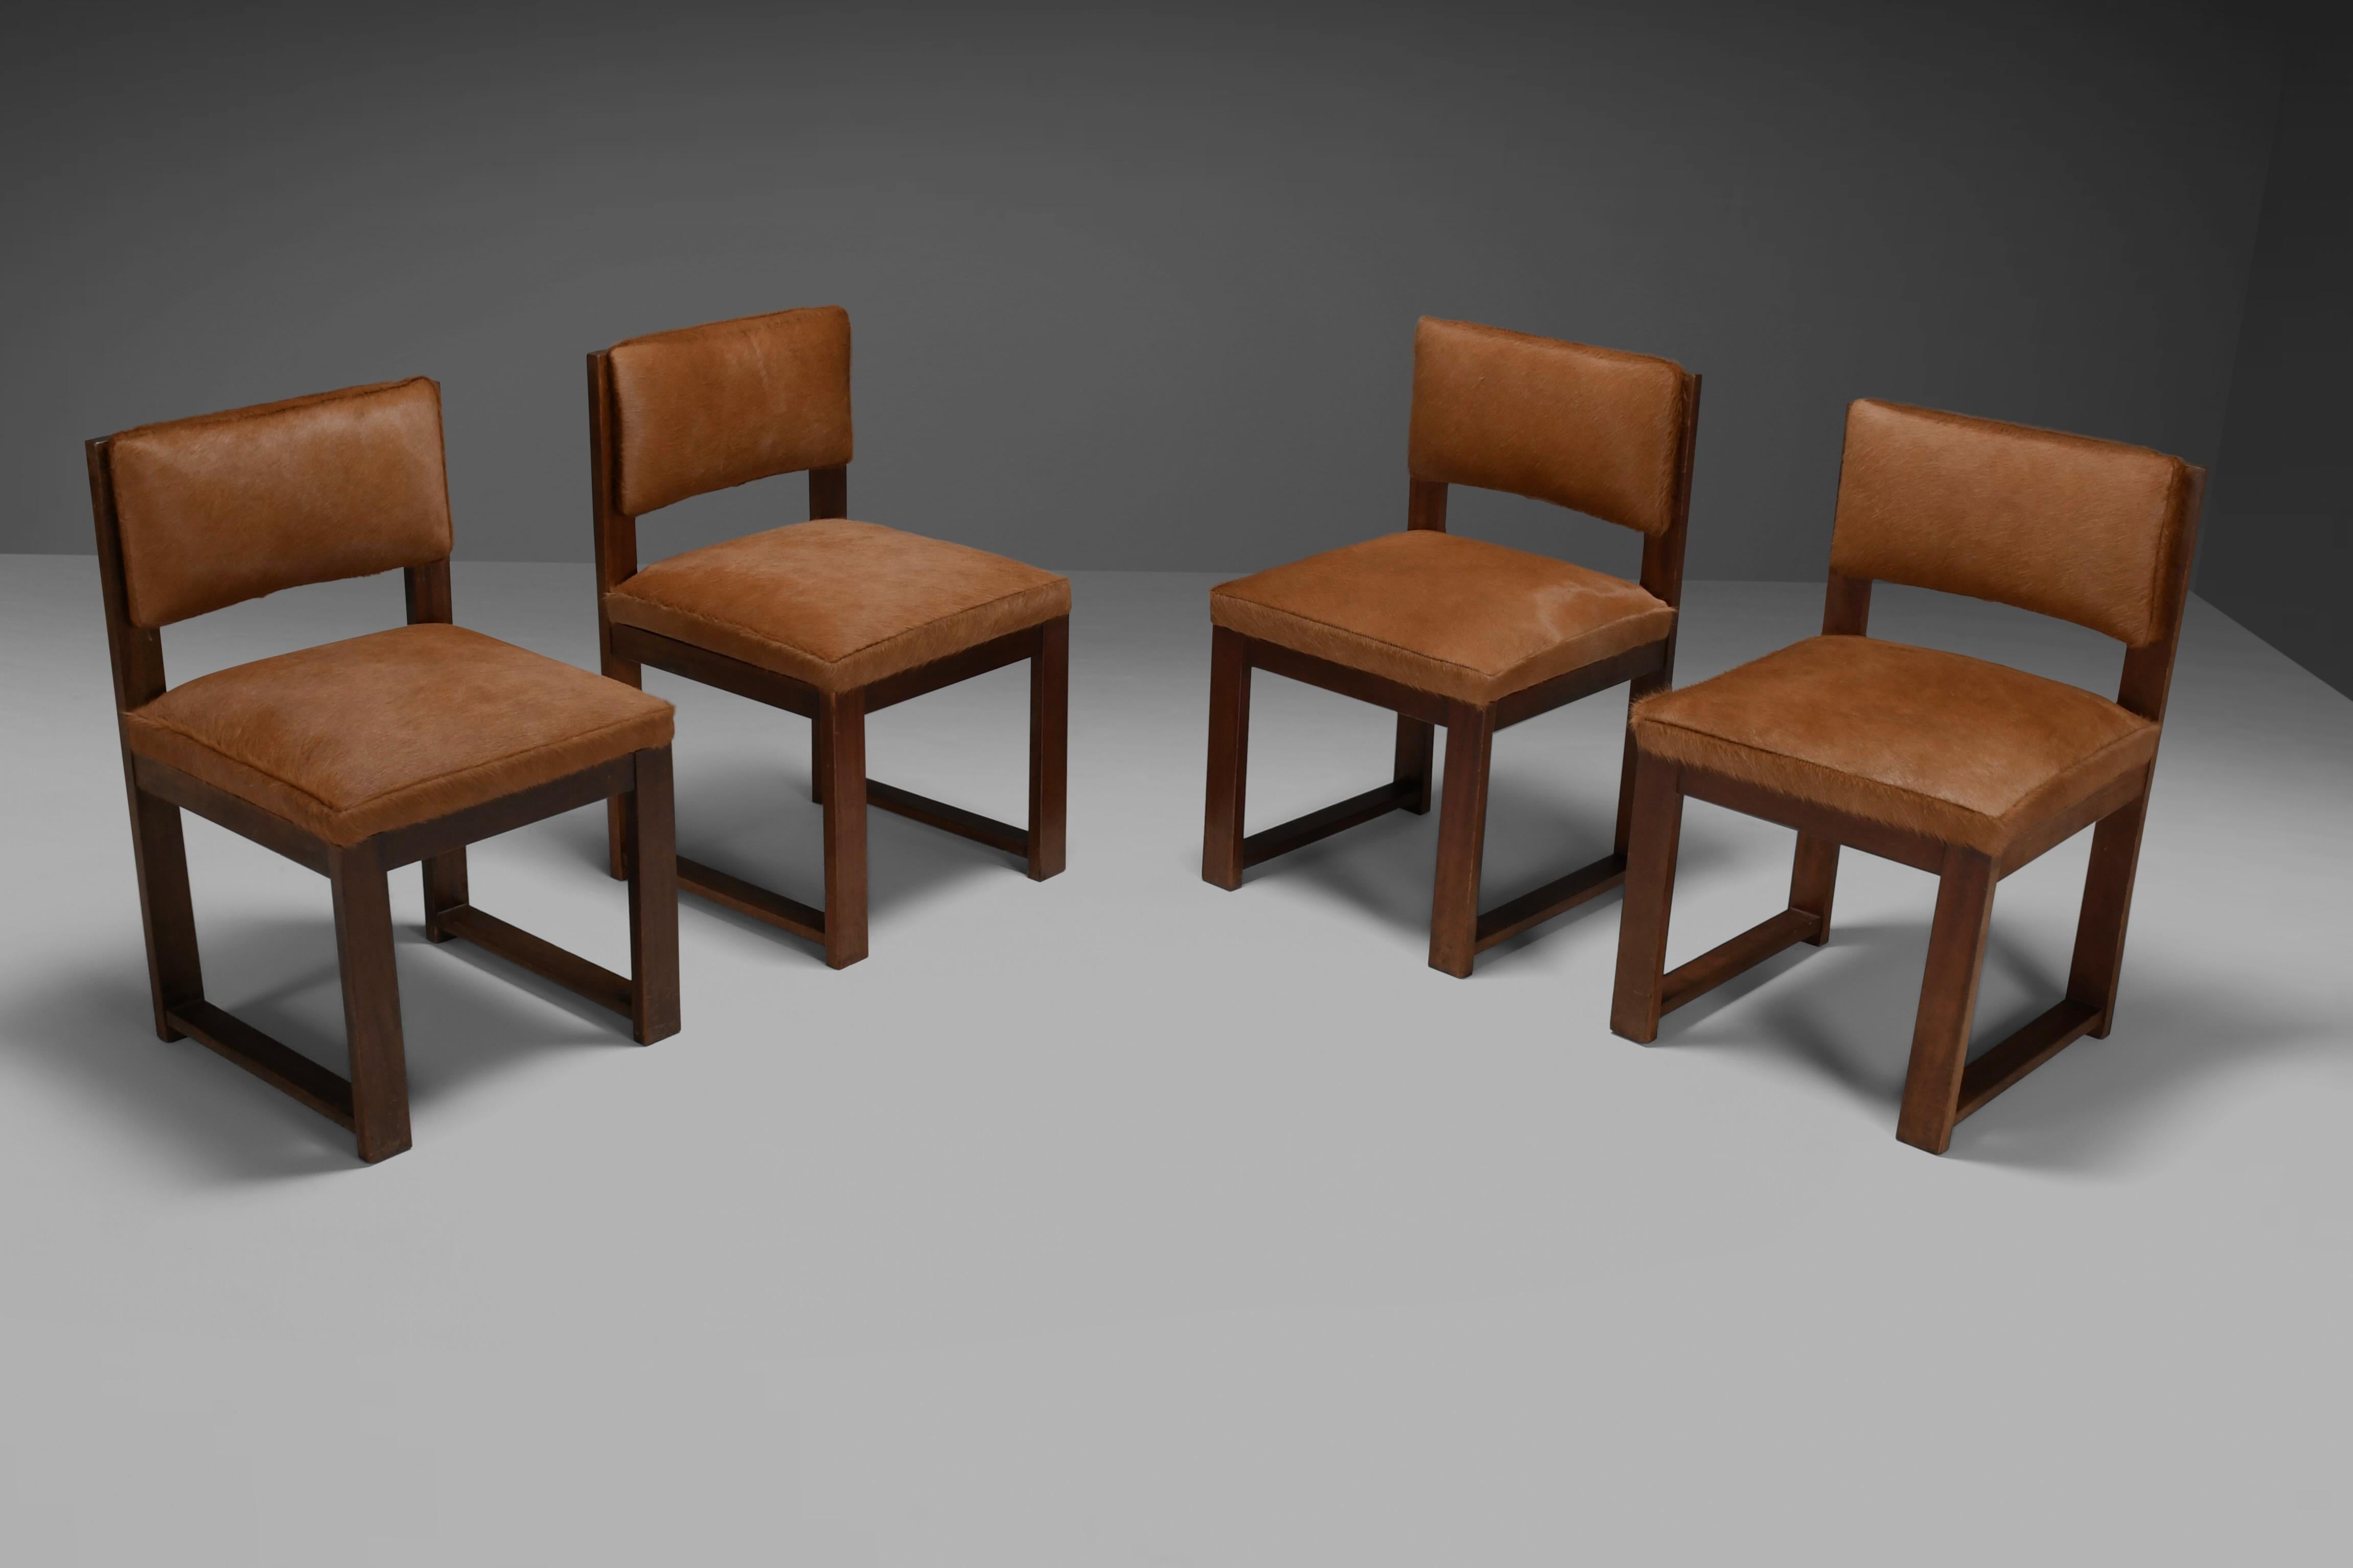 Set of 4 Minimalist Art Deco Dining Chairs in Cowhide, Netherlands, 1940s  For Sale 2